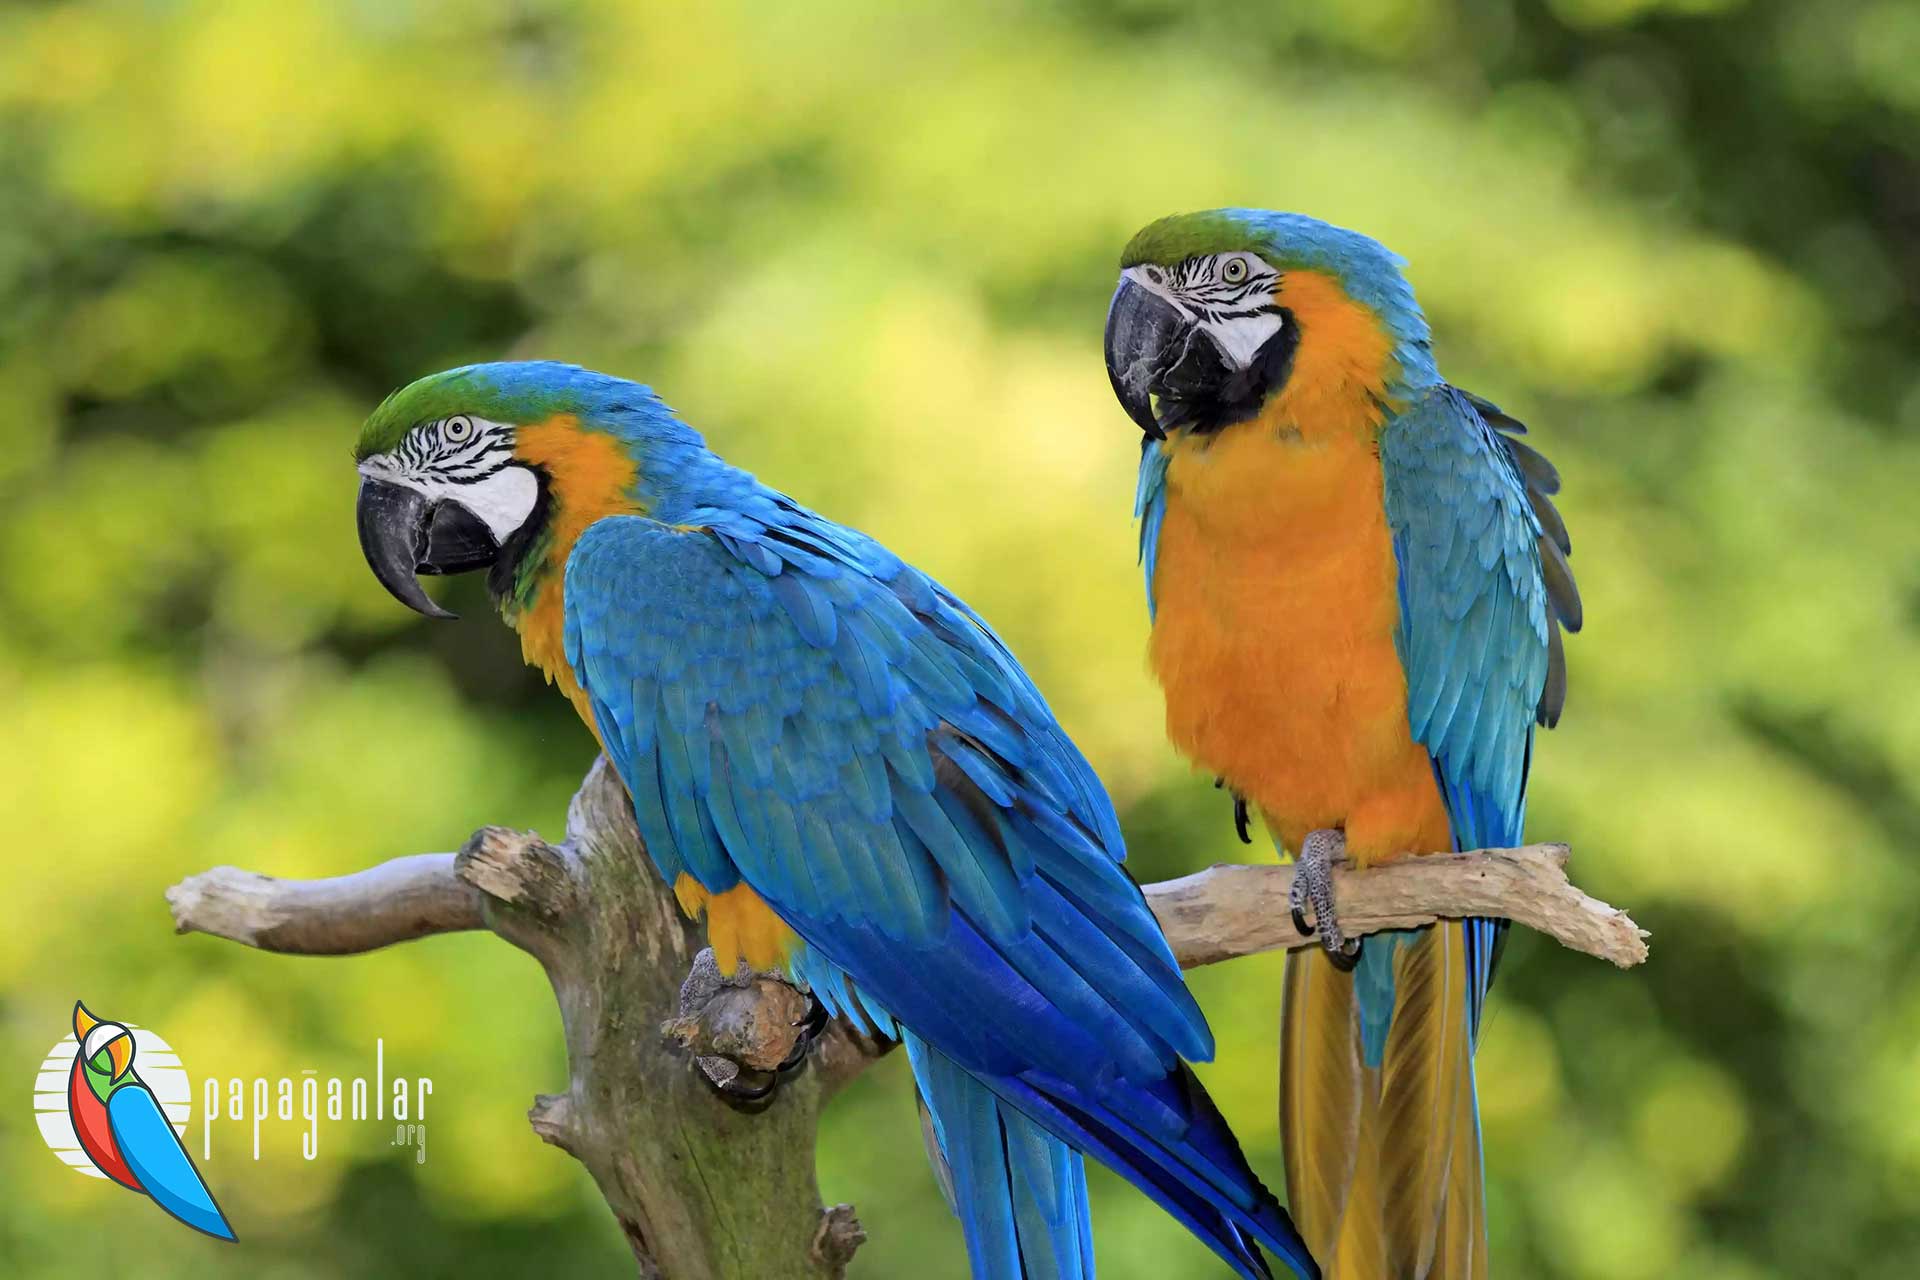 I want to adopt a macaw parrot